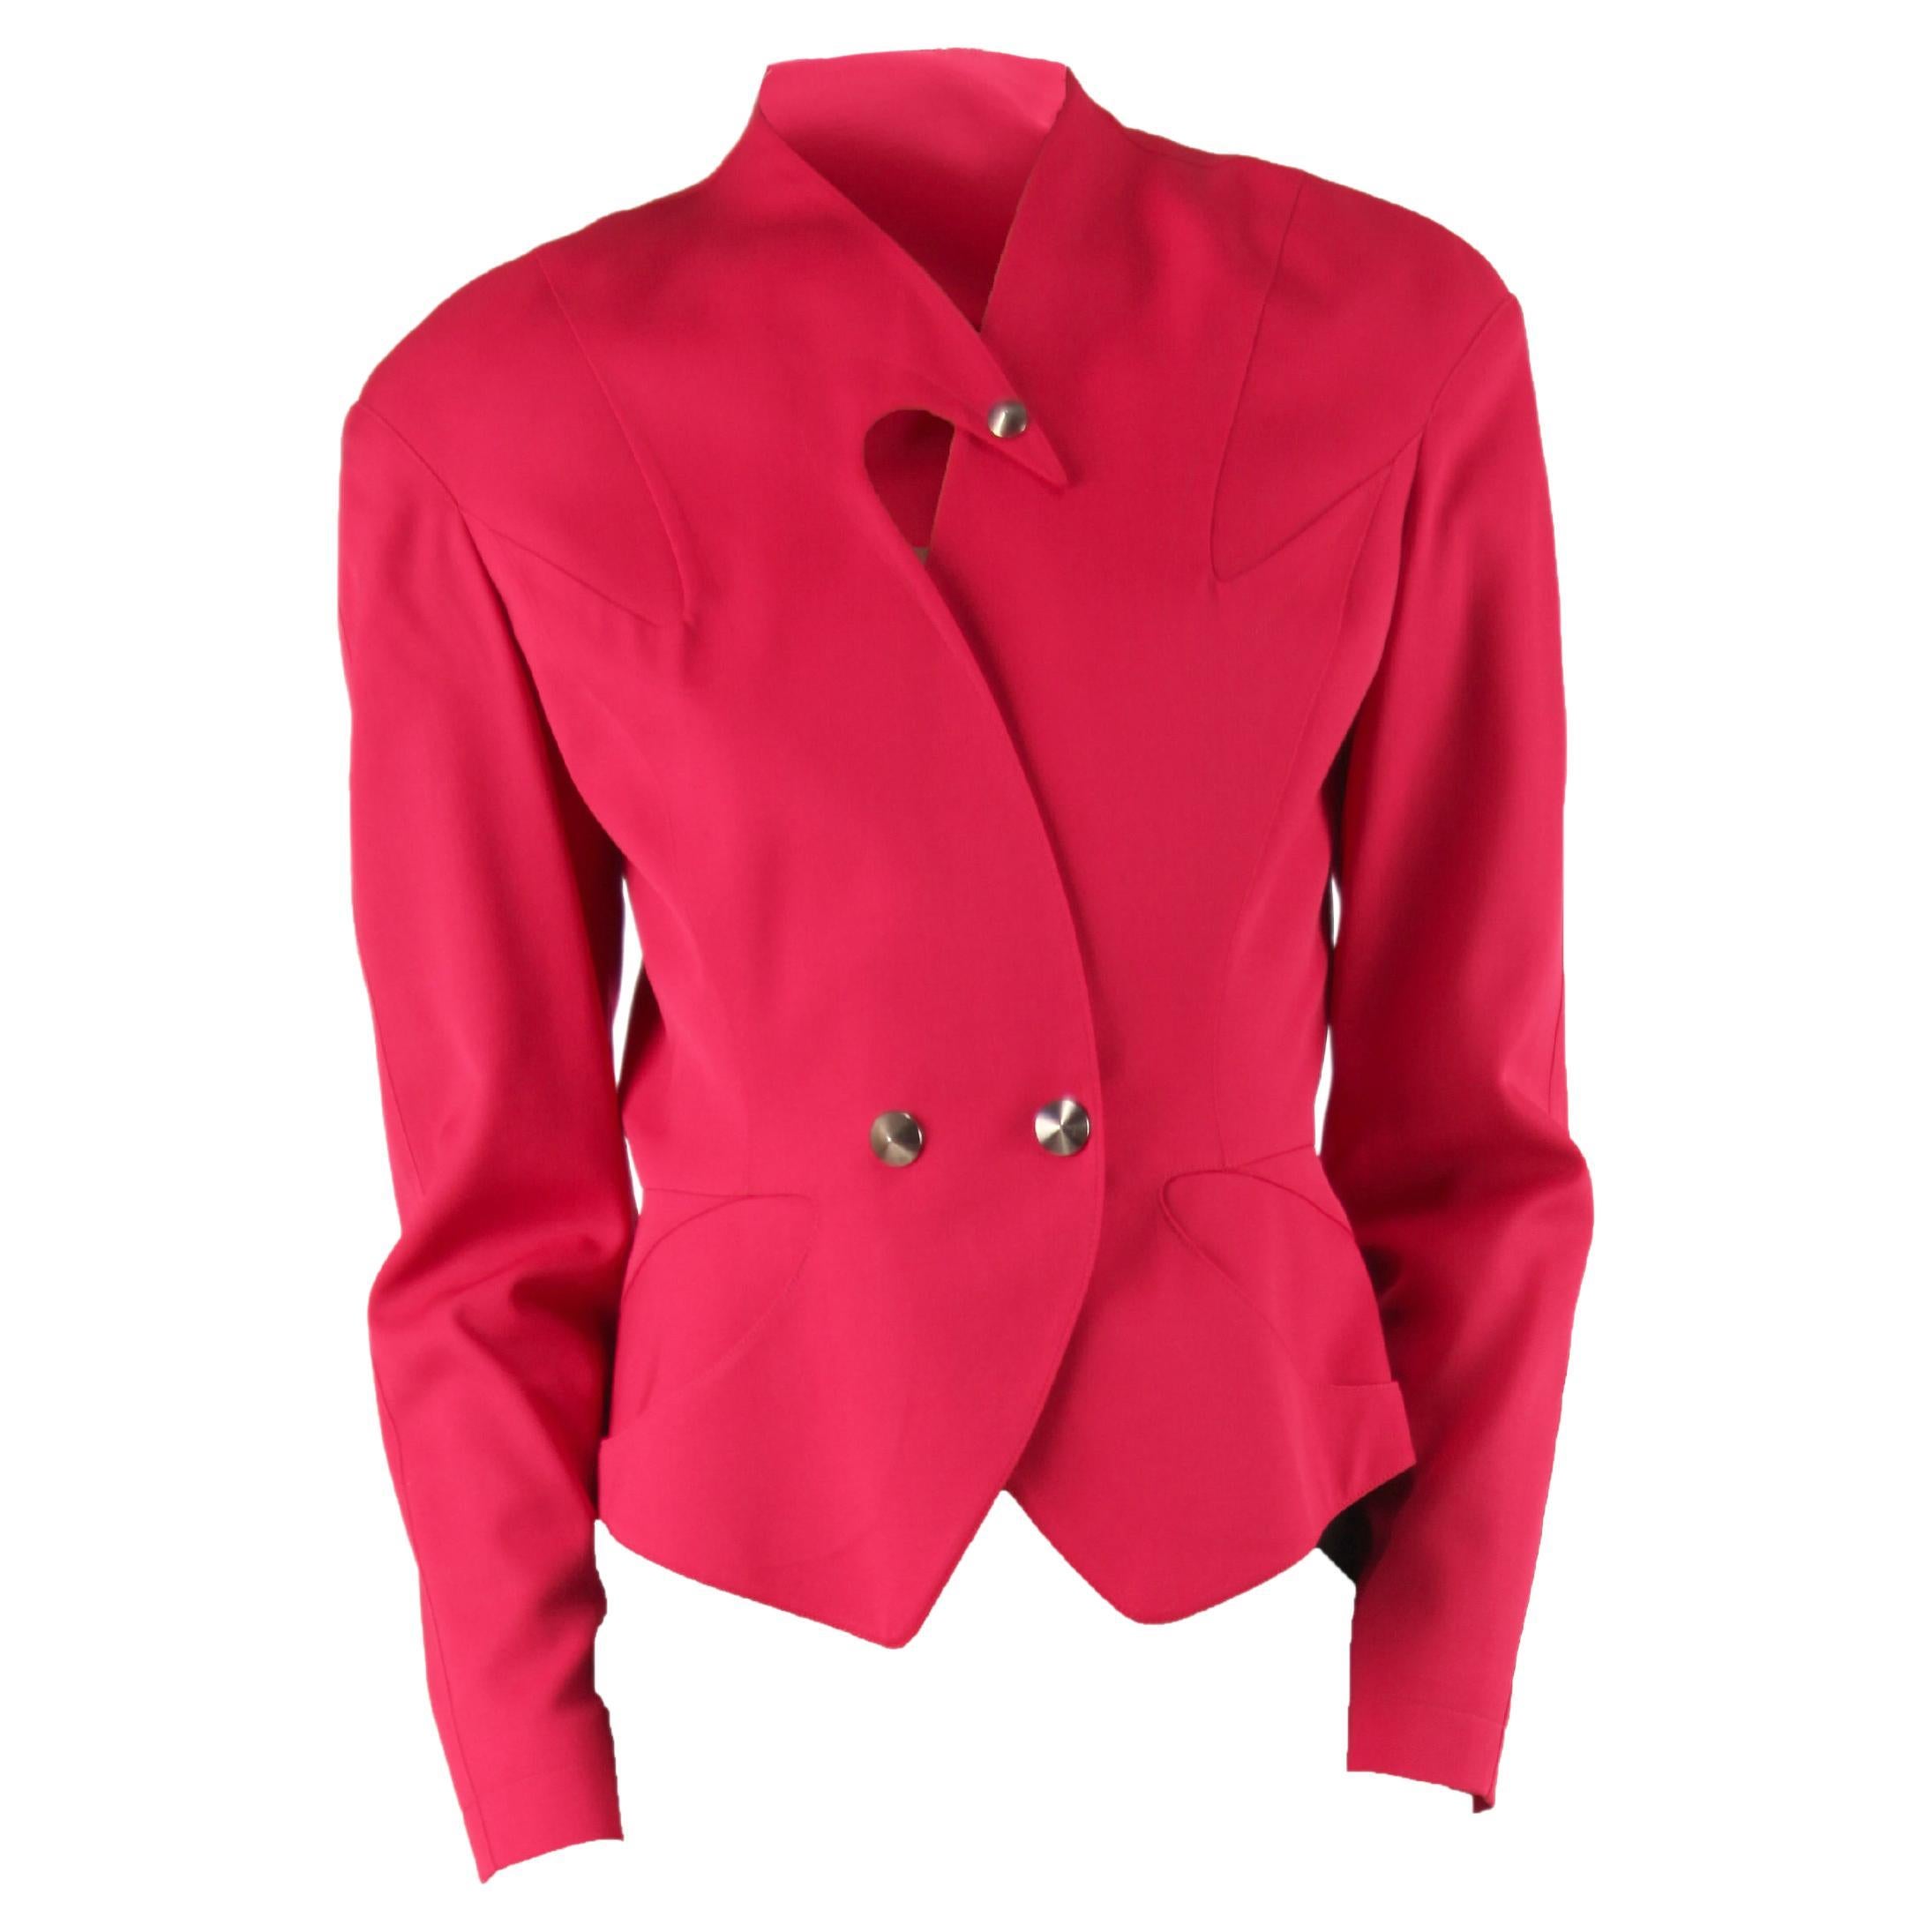 Thierry Mugler collectable intense “red-pink” hourglass jacket, circa 1980s  For Sale at 1stDibs